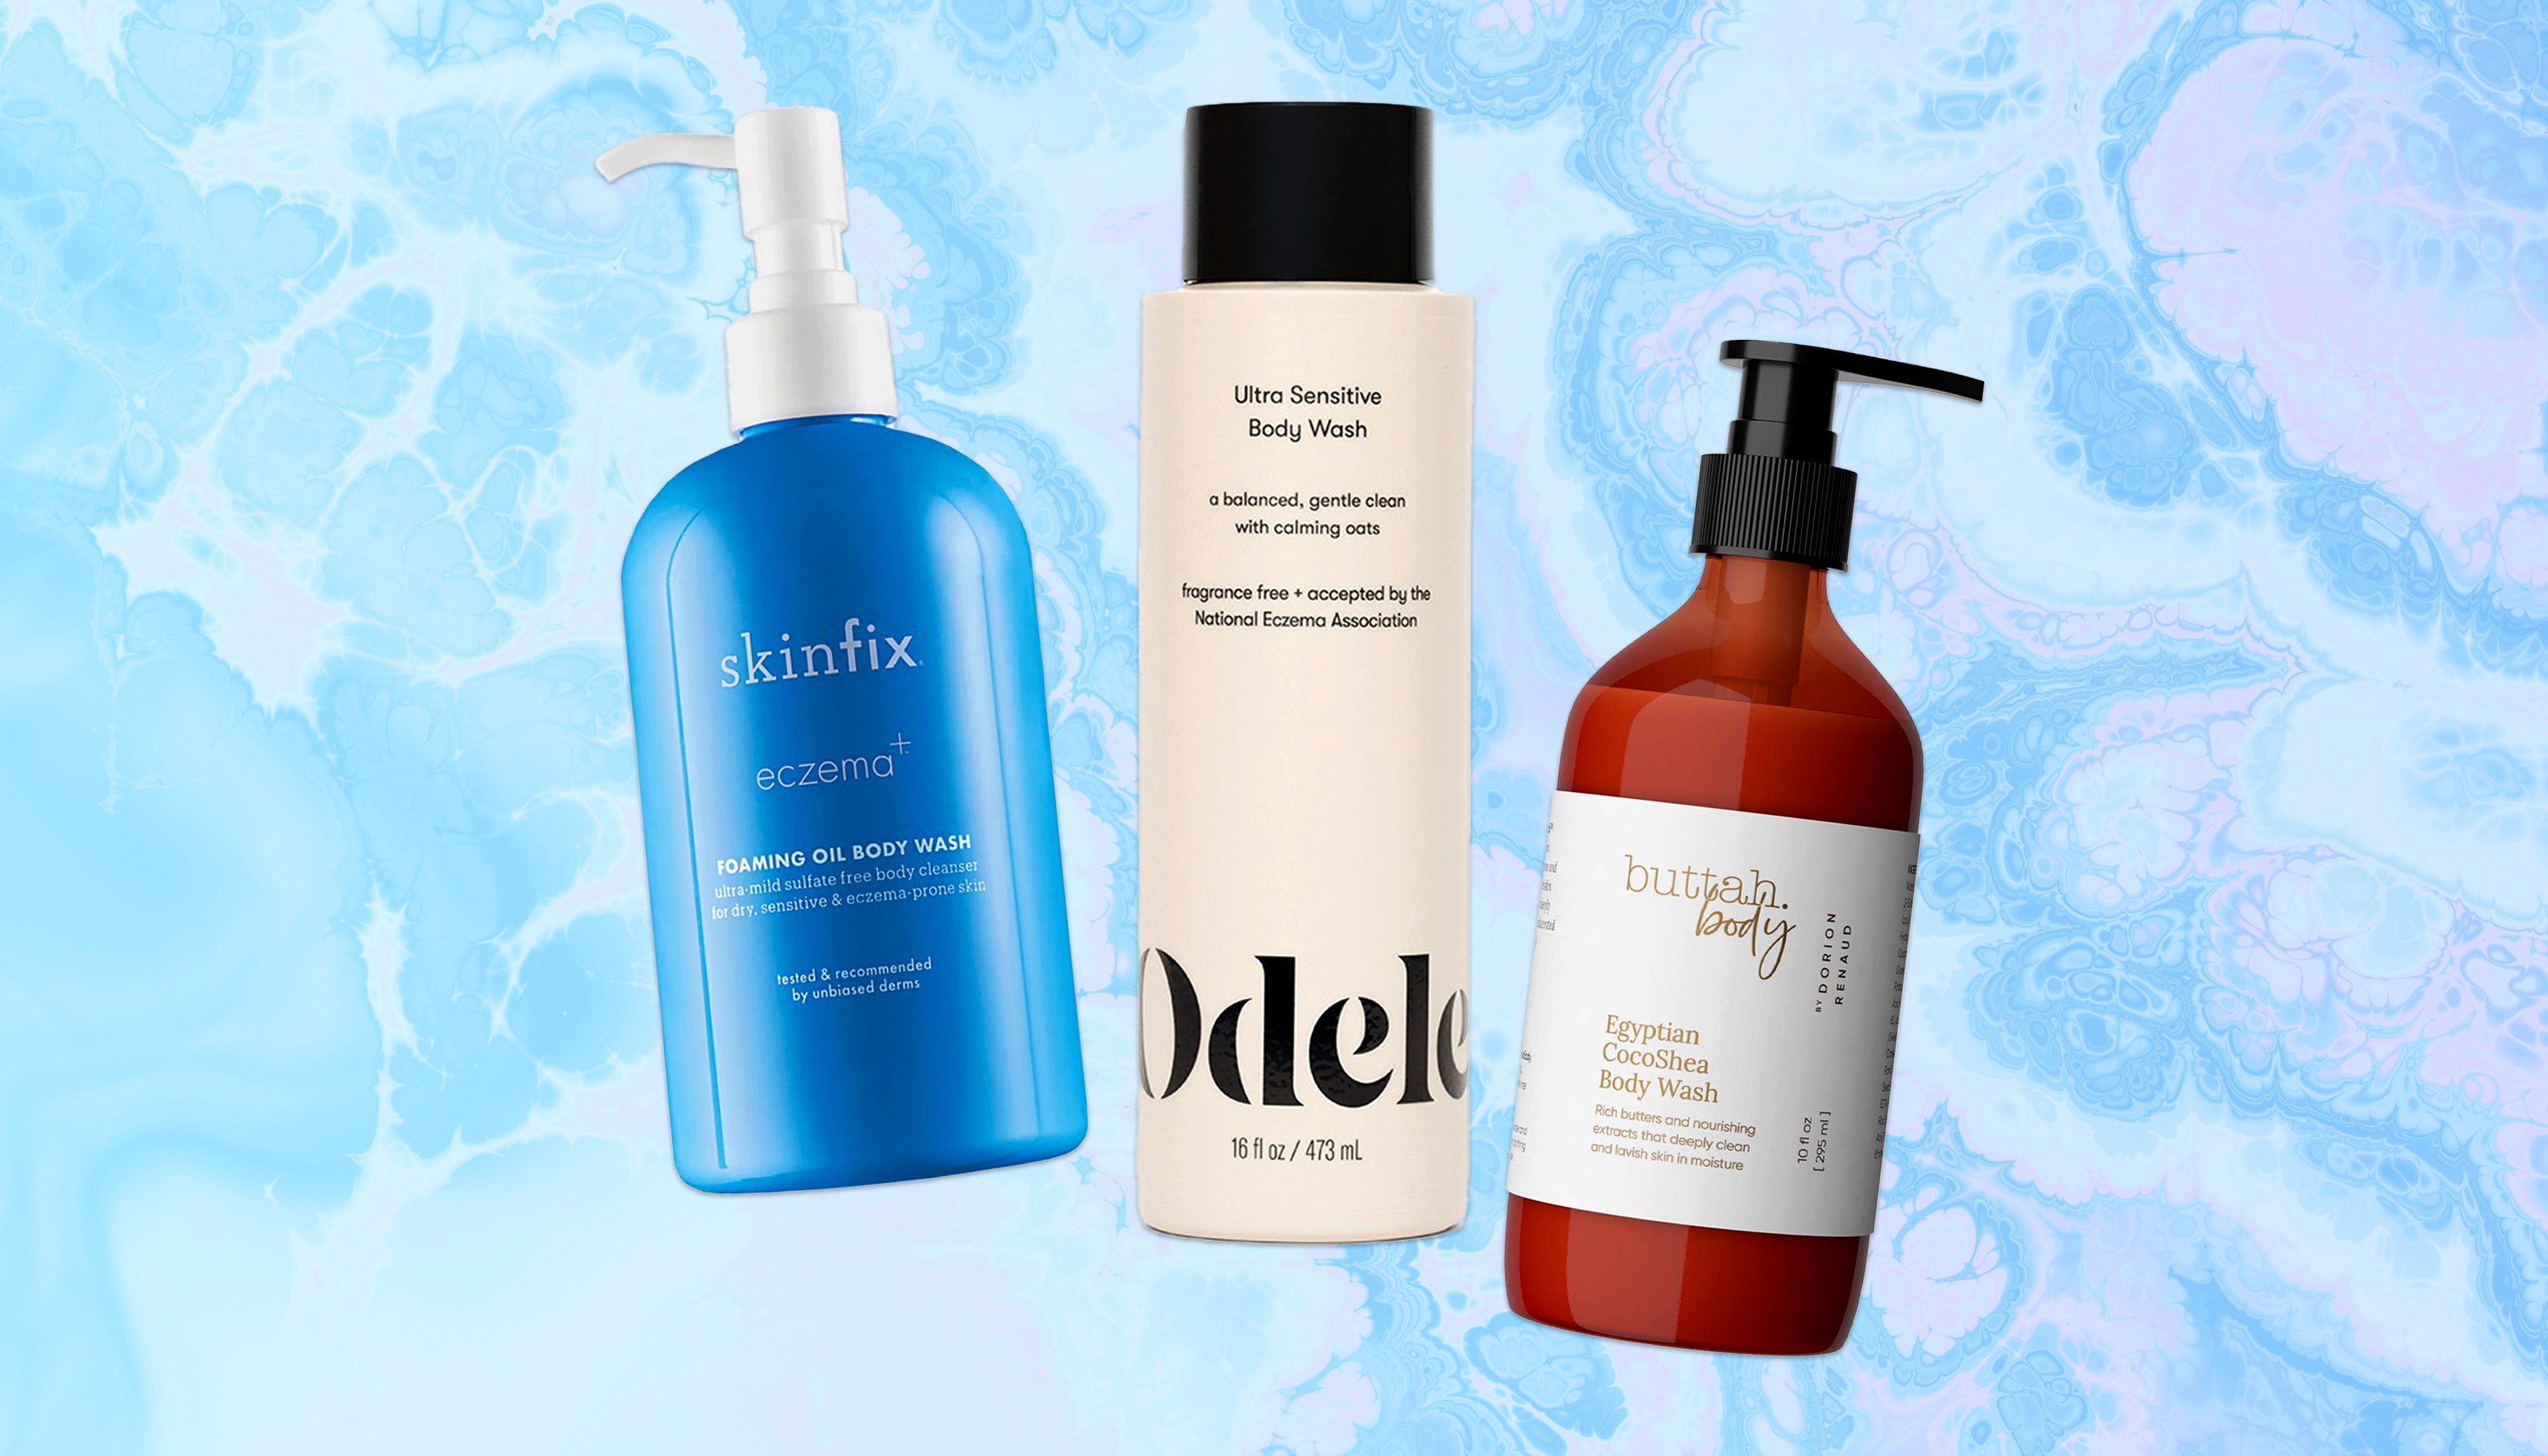 Top 5 shower gel bottles worth investing in to have a cool summer